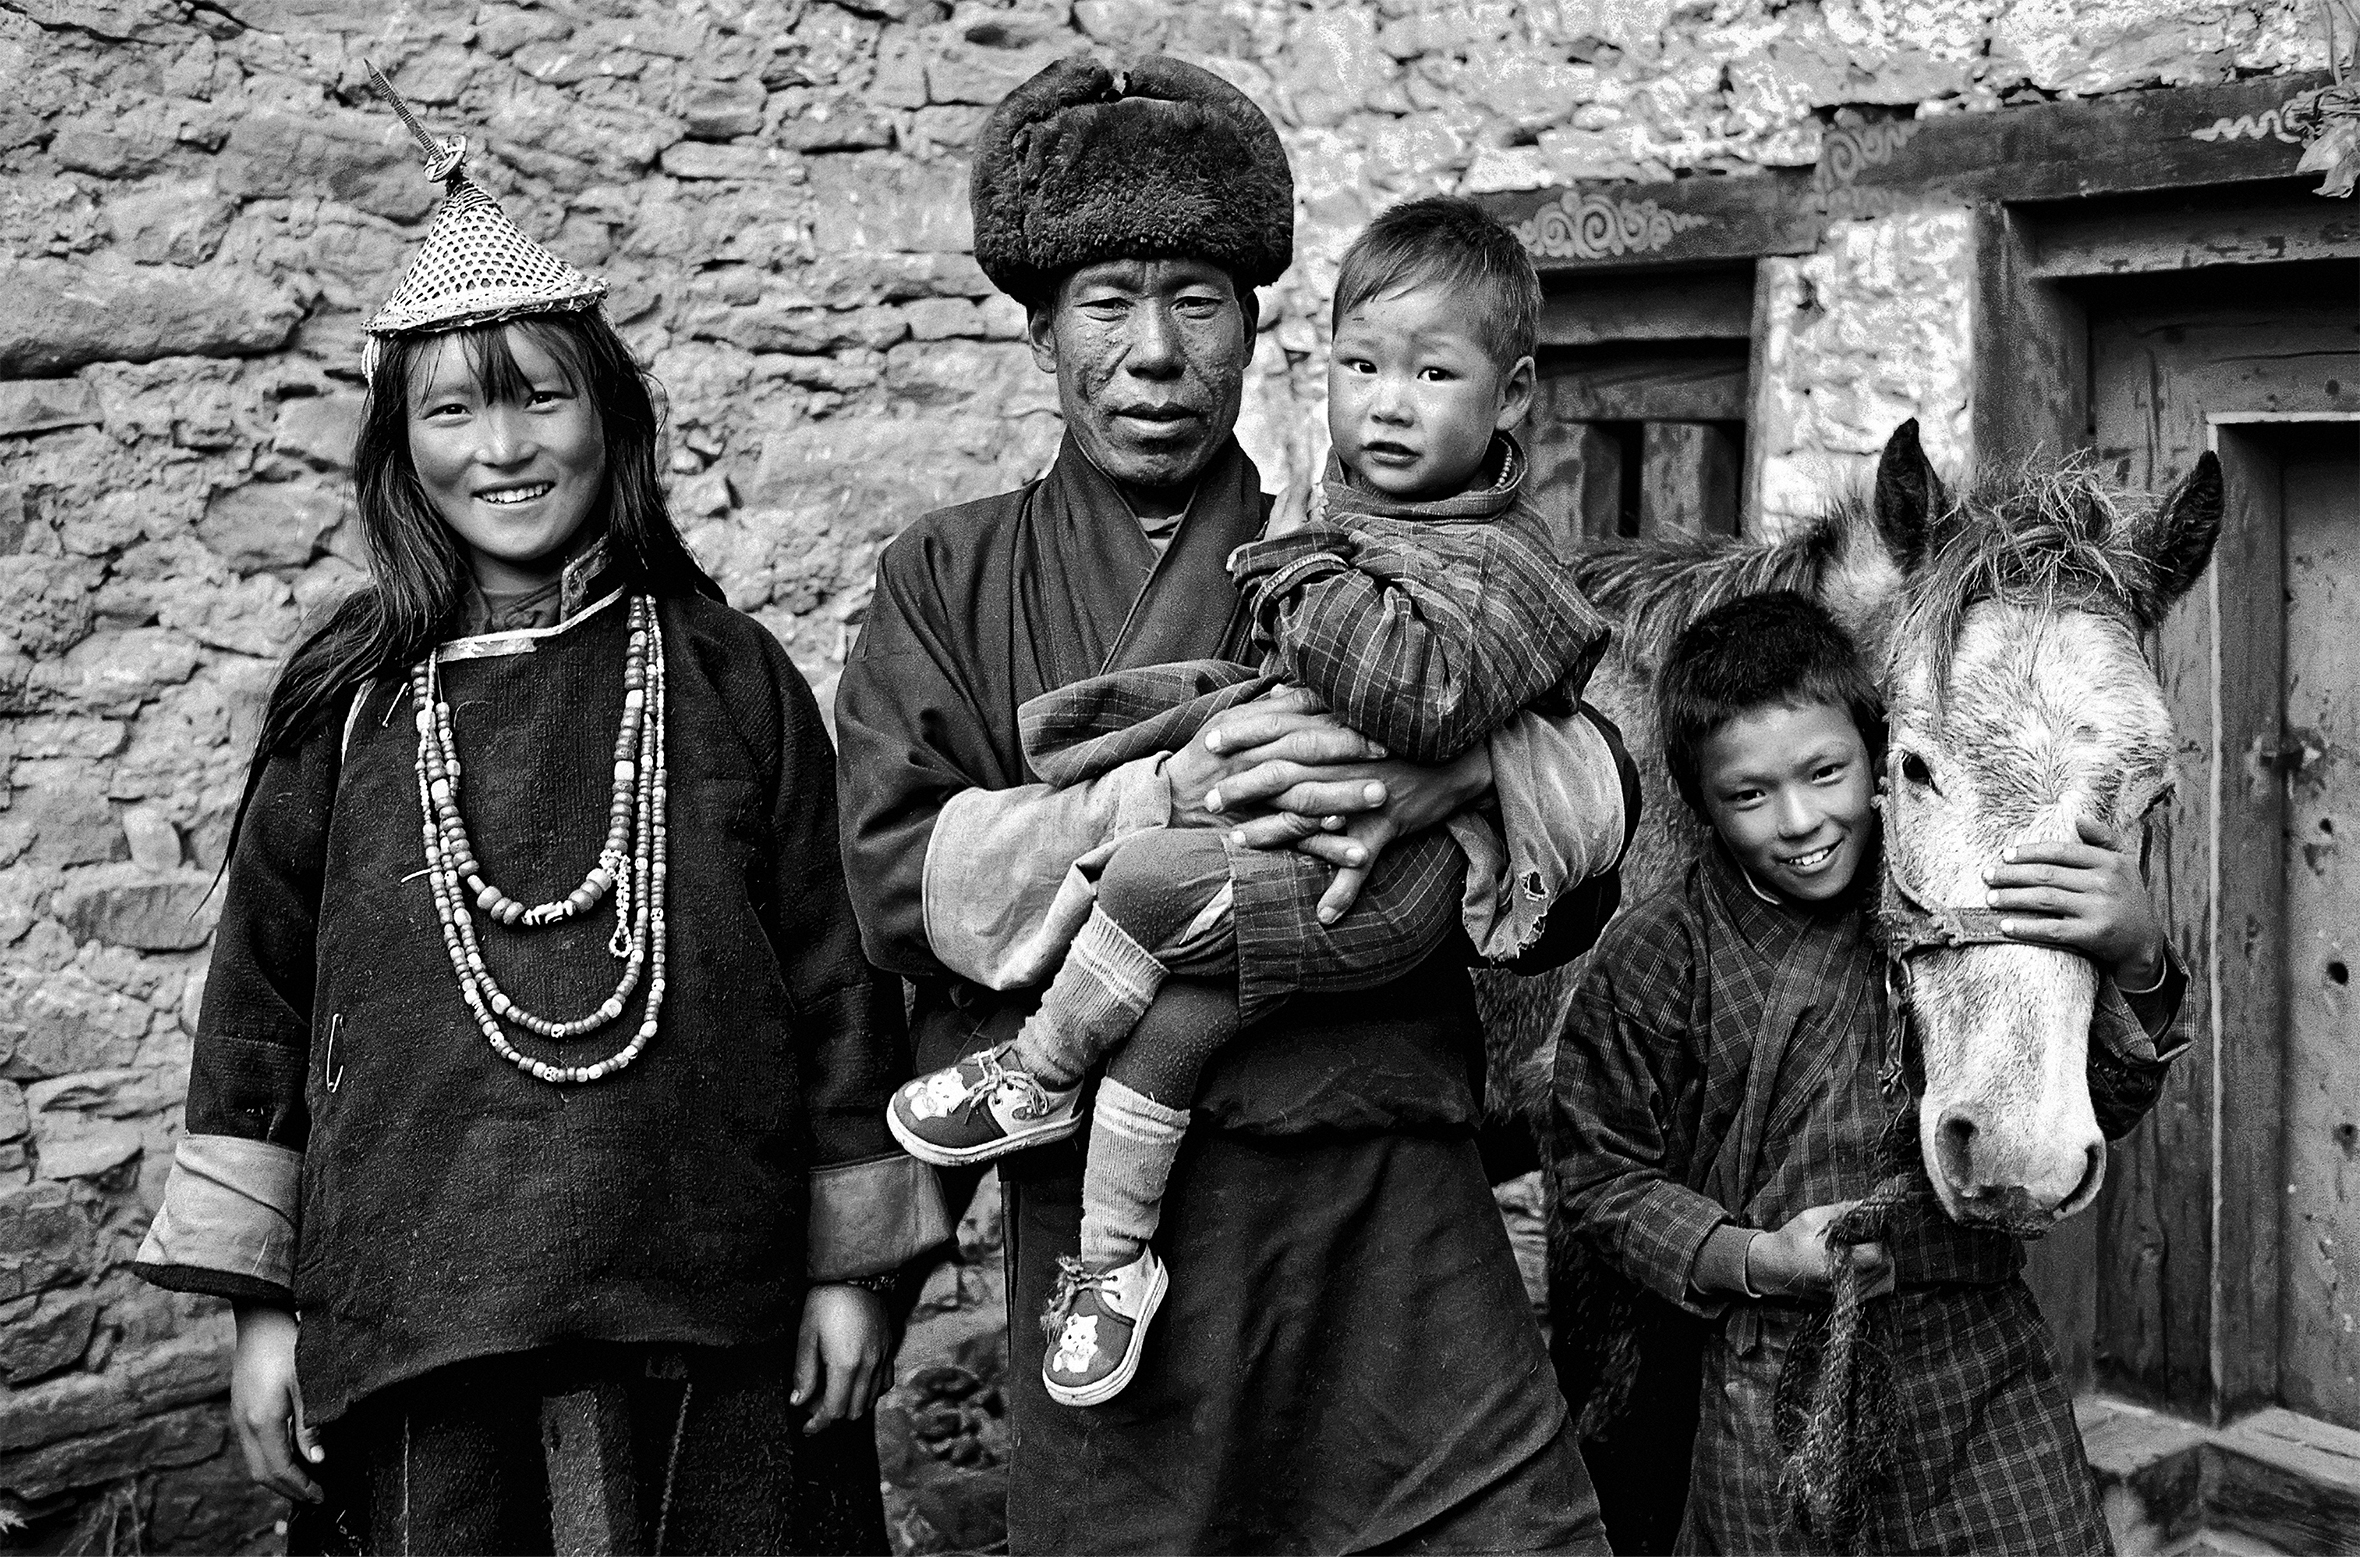 A Bhutanese family and a horse. The wife and husband are wearing traditional clothing. The husband is holding one of their young children. Their other child, an older boy, is standing beside his father and has an arm wrapped around the horse’s muzzle.